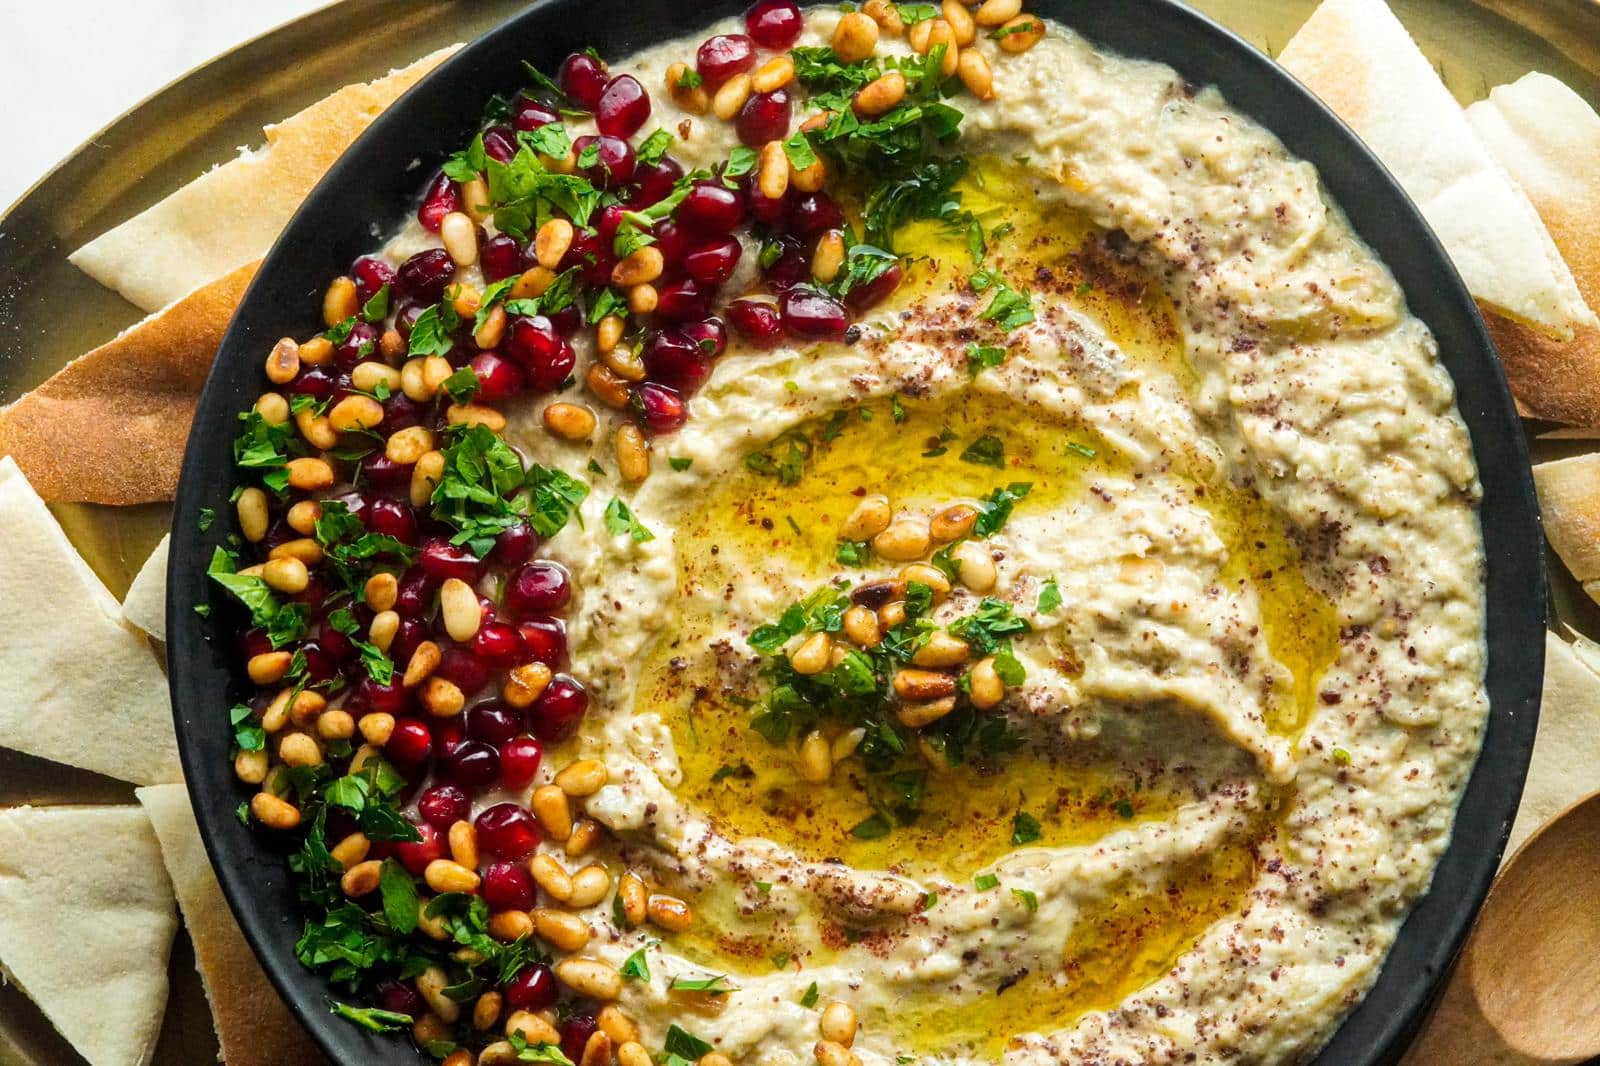 A large plate of Baba Ghanoush, topped with olive oil in the middle, pine nuts, pomegranate seeds, and parsley. Pita bread around it.